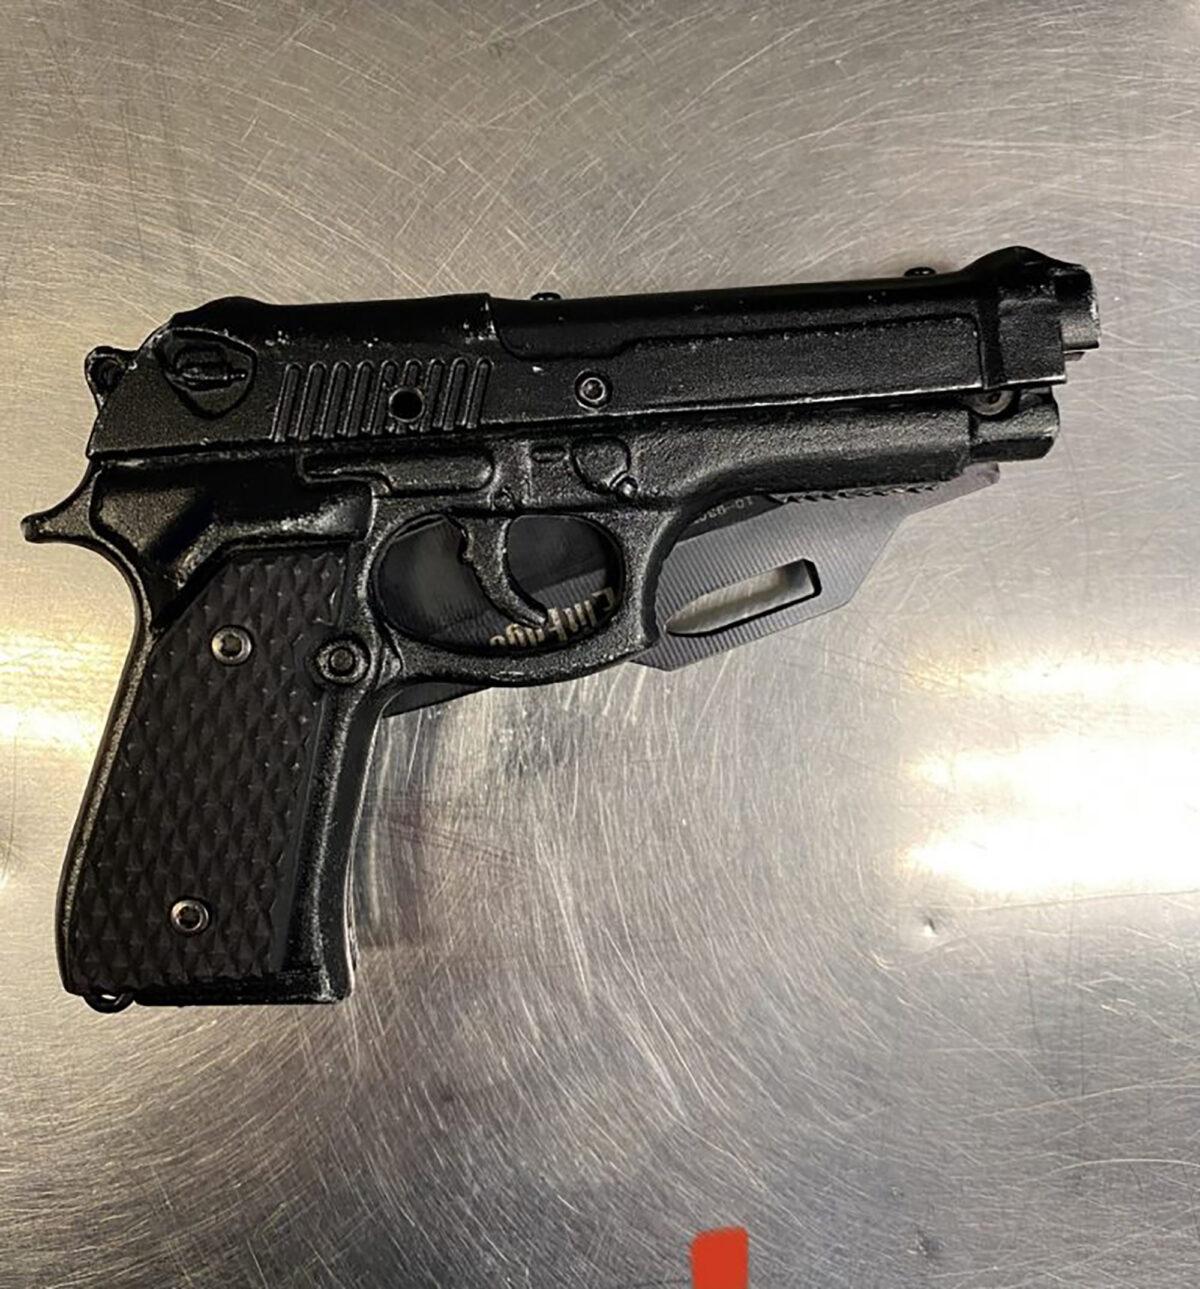 A replica gun with a knife that was taken from the man arrested in Tuesday night’s attack on Dave Chappelle at the Hollywood Bowl, Calif., on May 3, 2022. (Los Angeles Police Department)